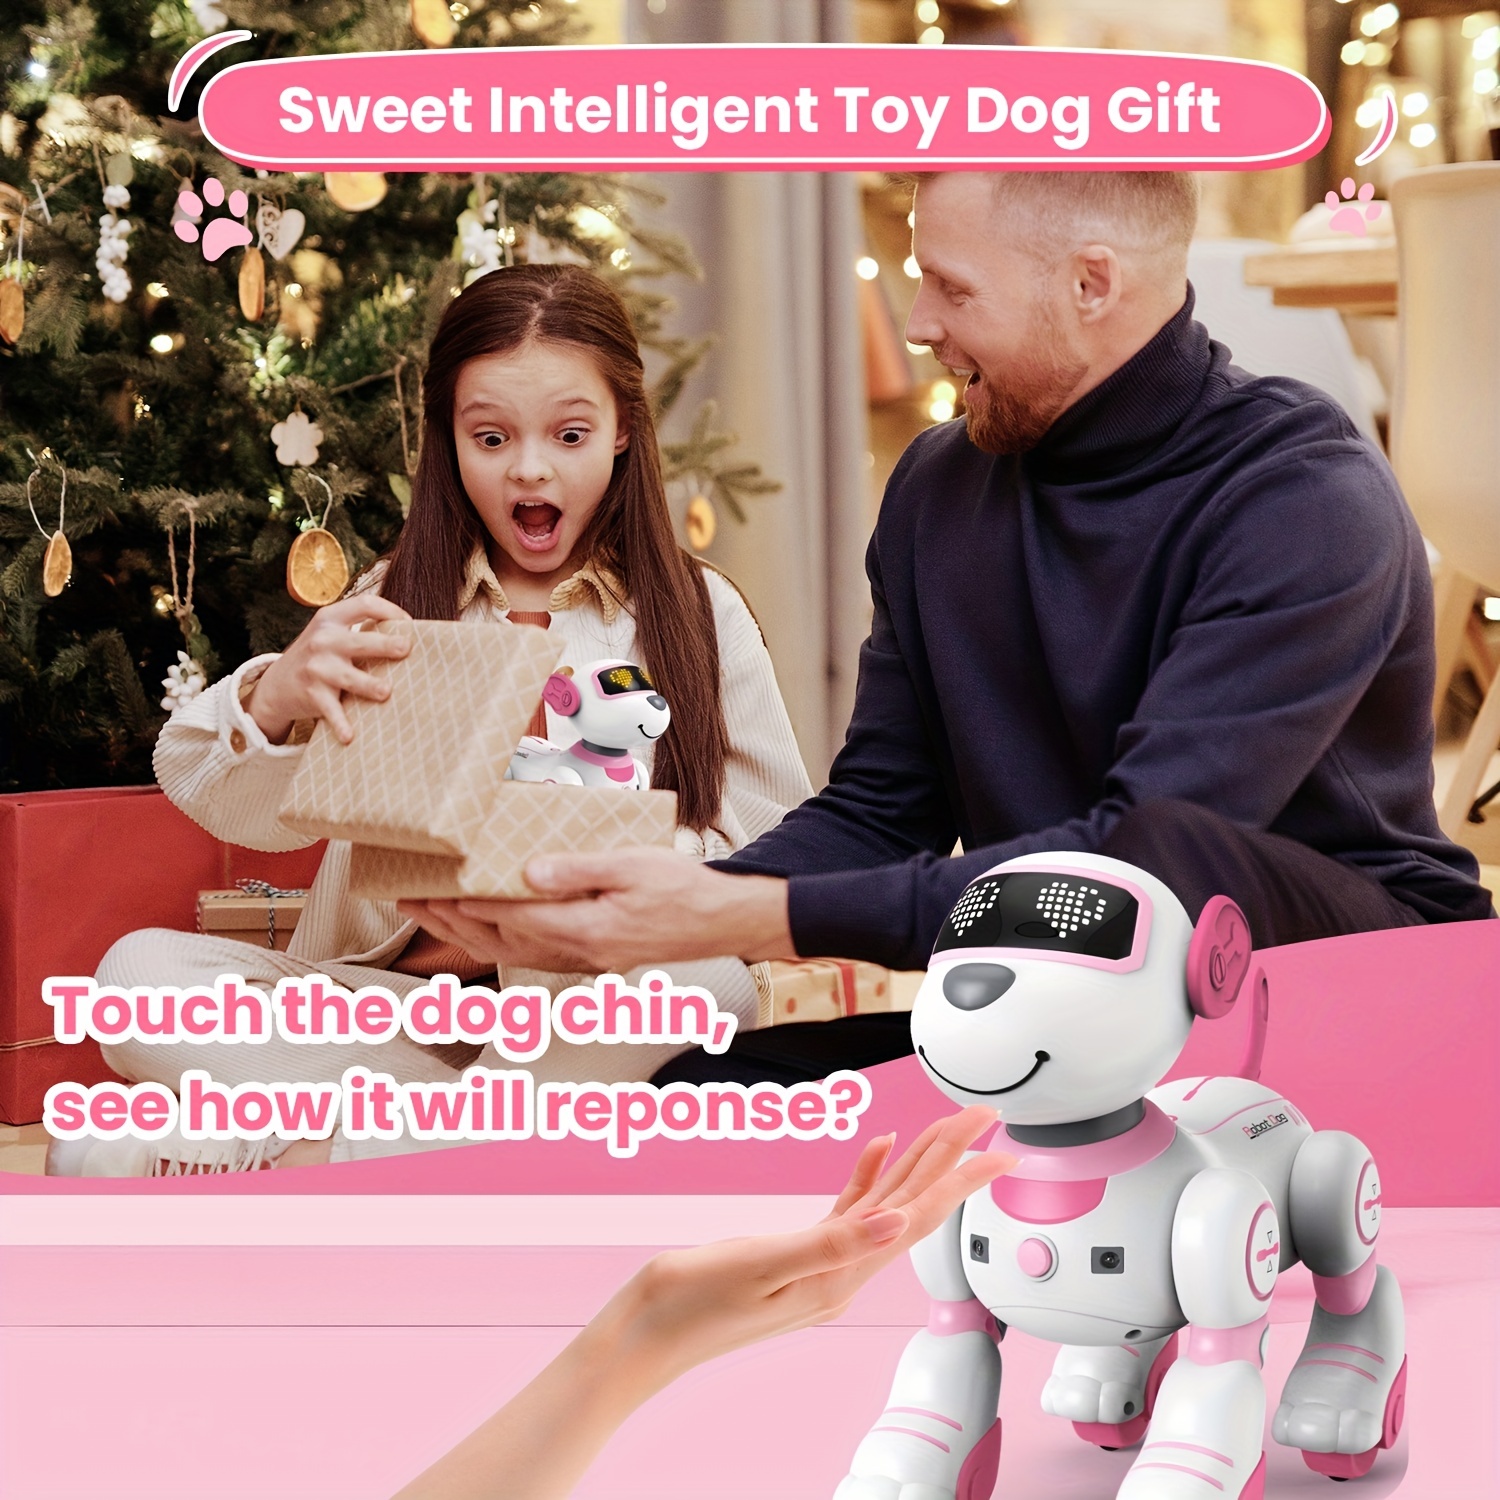 Contixo R3 Interactive Smart Robot Pet Dog Toy with Remote Control